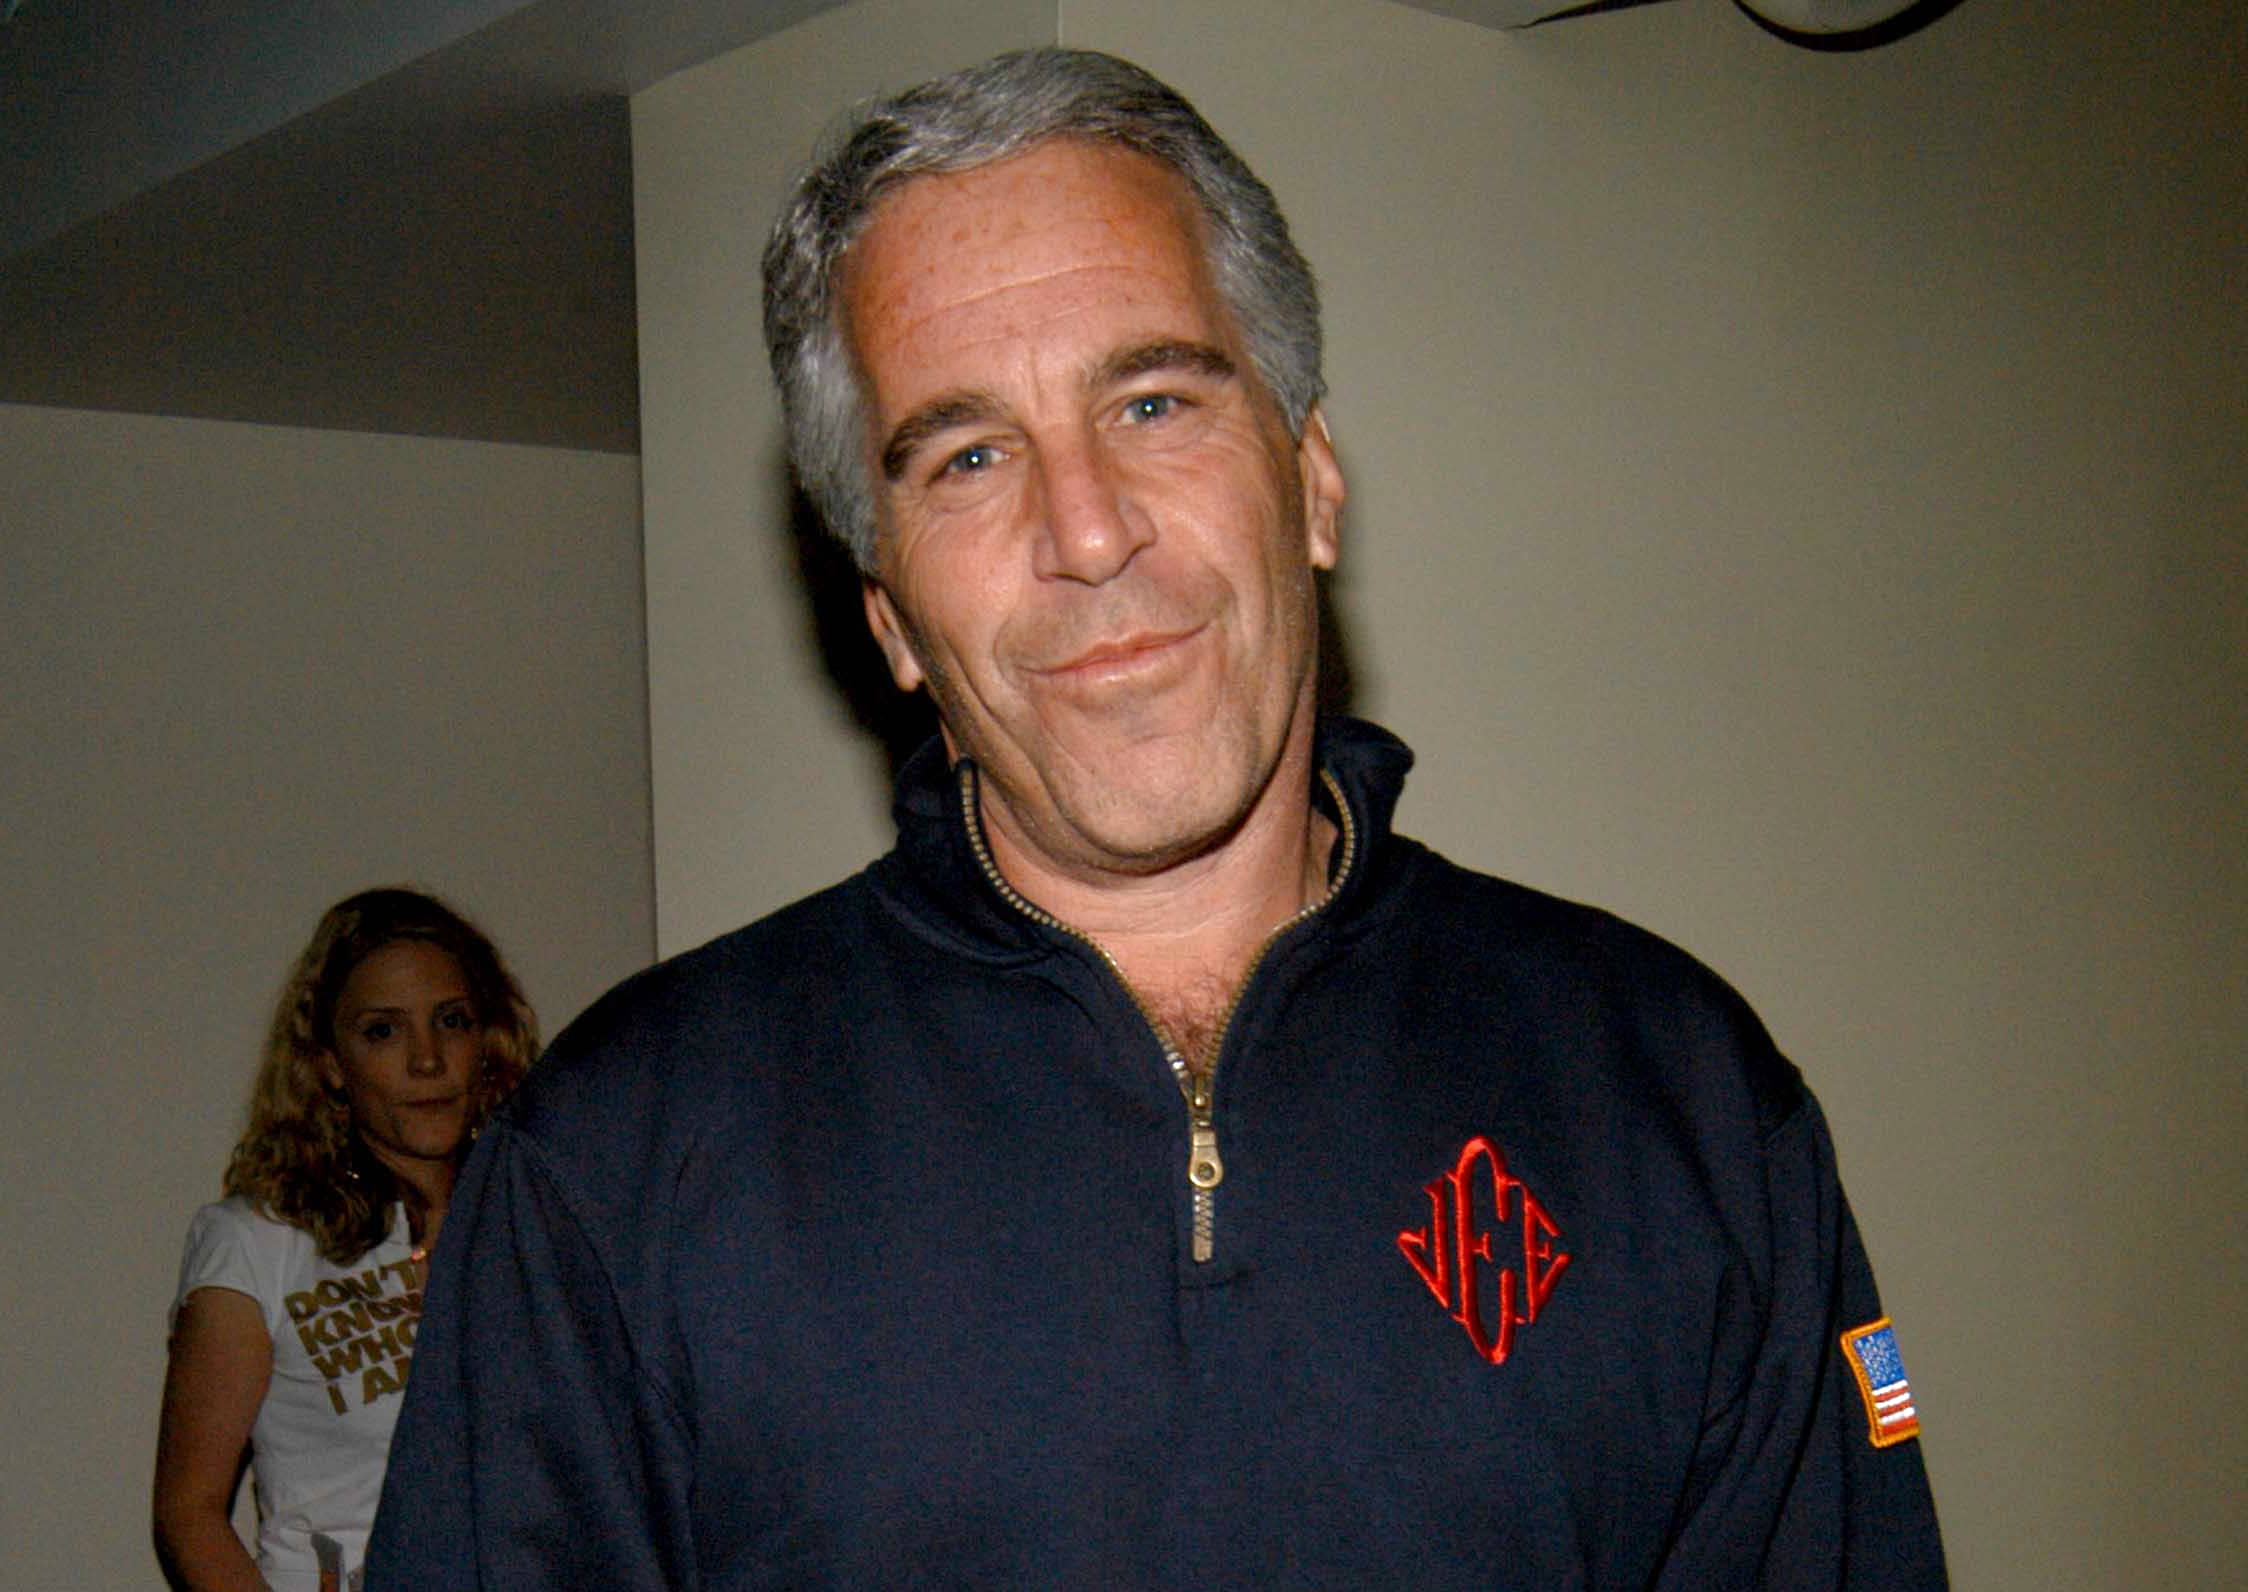 NYT columnist: Jeffrey Epstein said he was helping Elon Musk find a new chairman for Tesla